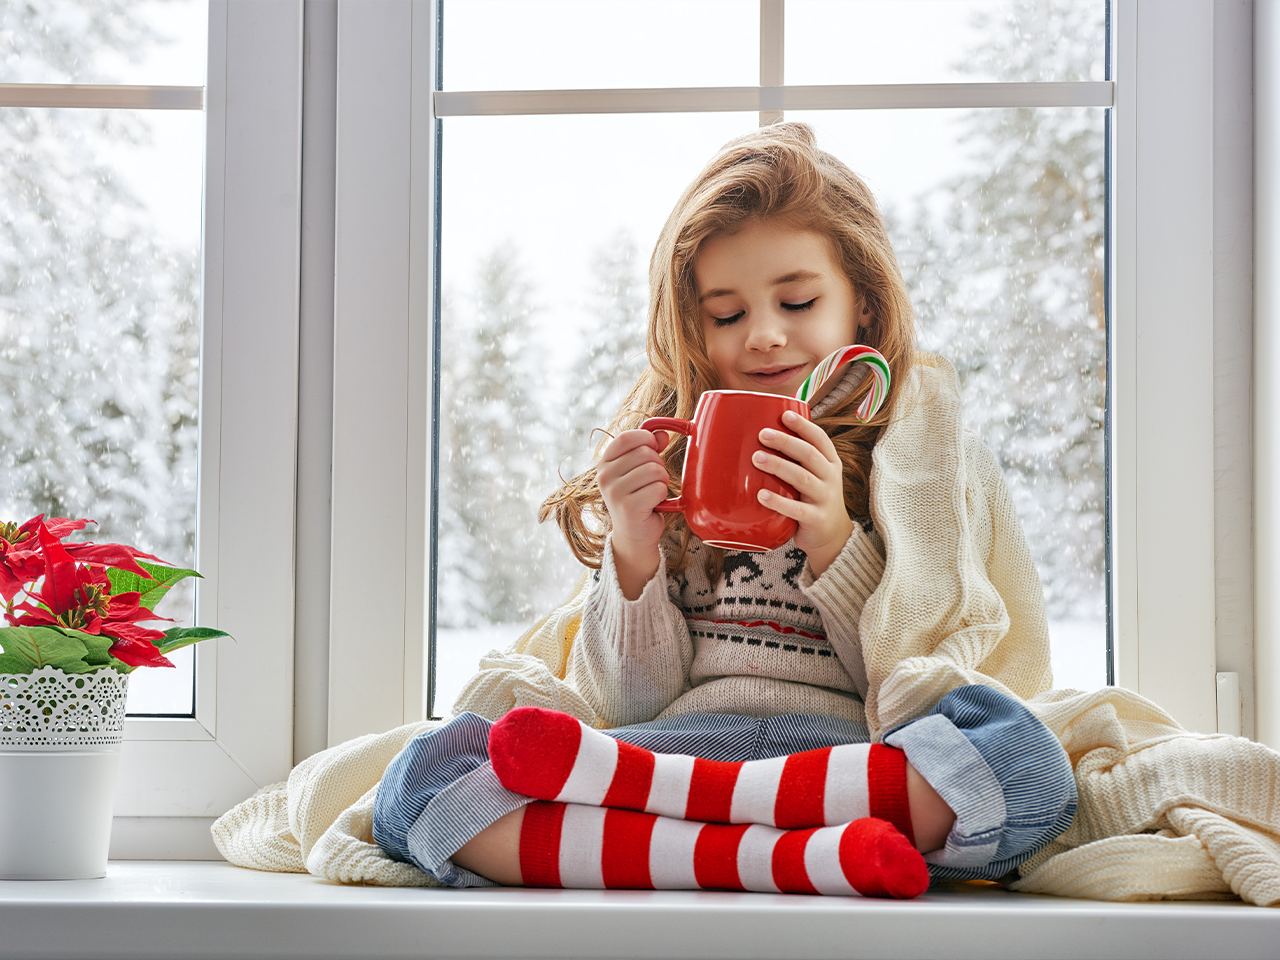 Small Girl With cup in winter on the windowsill